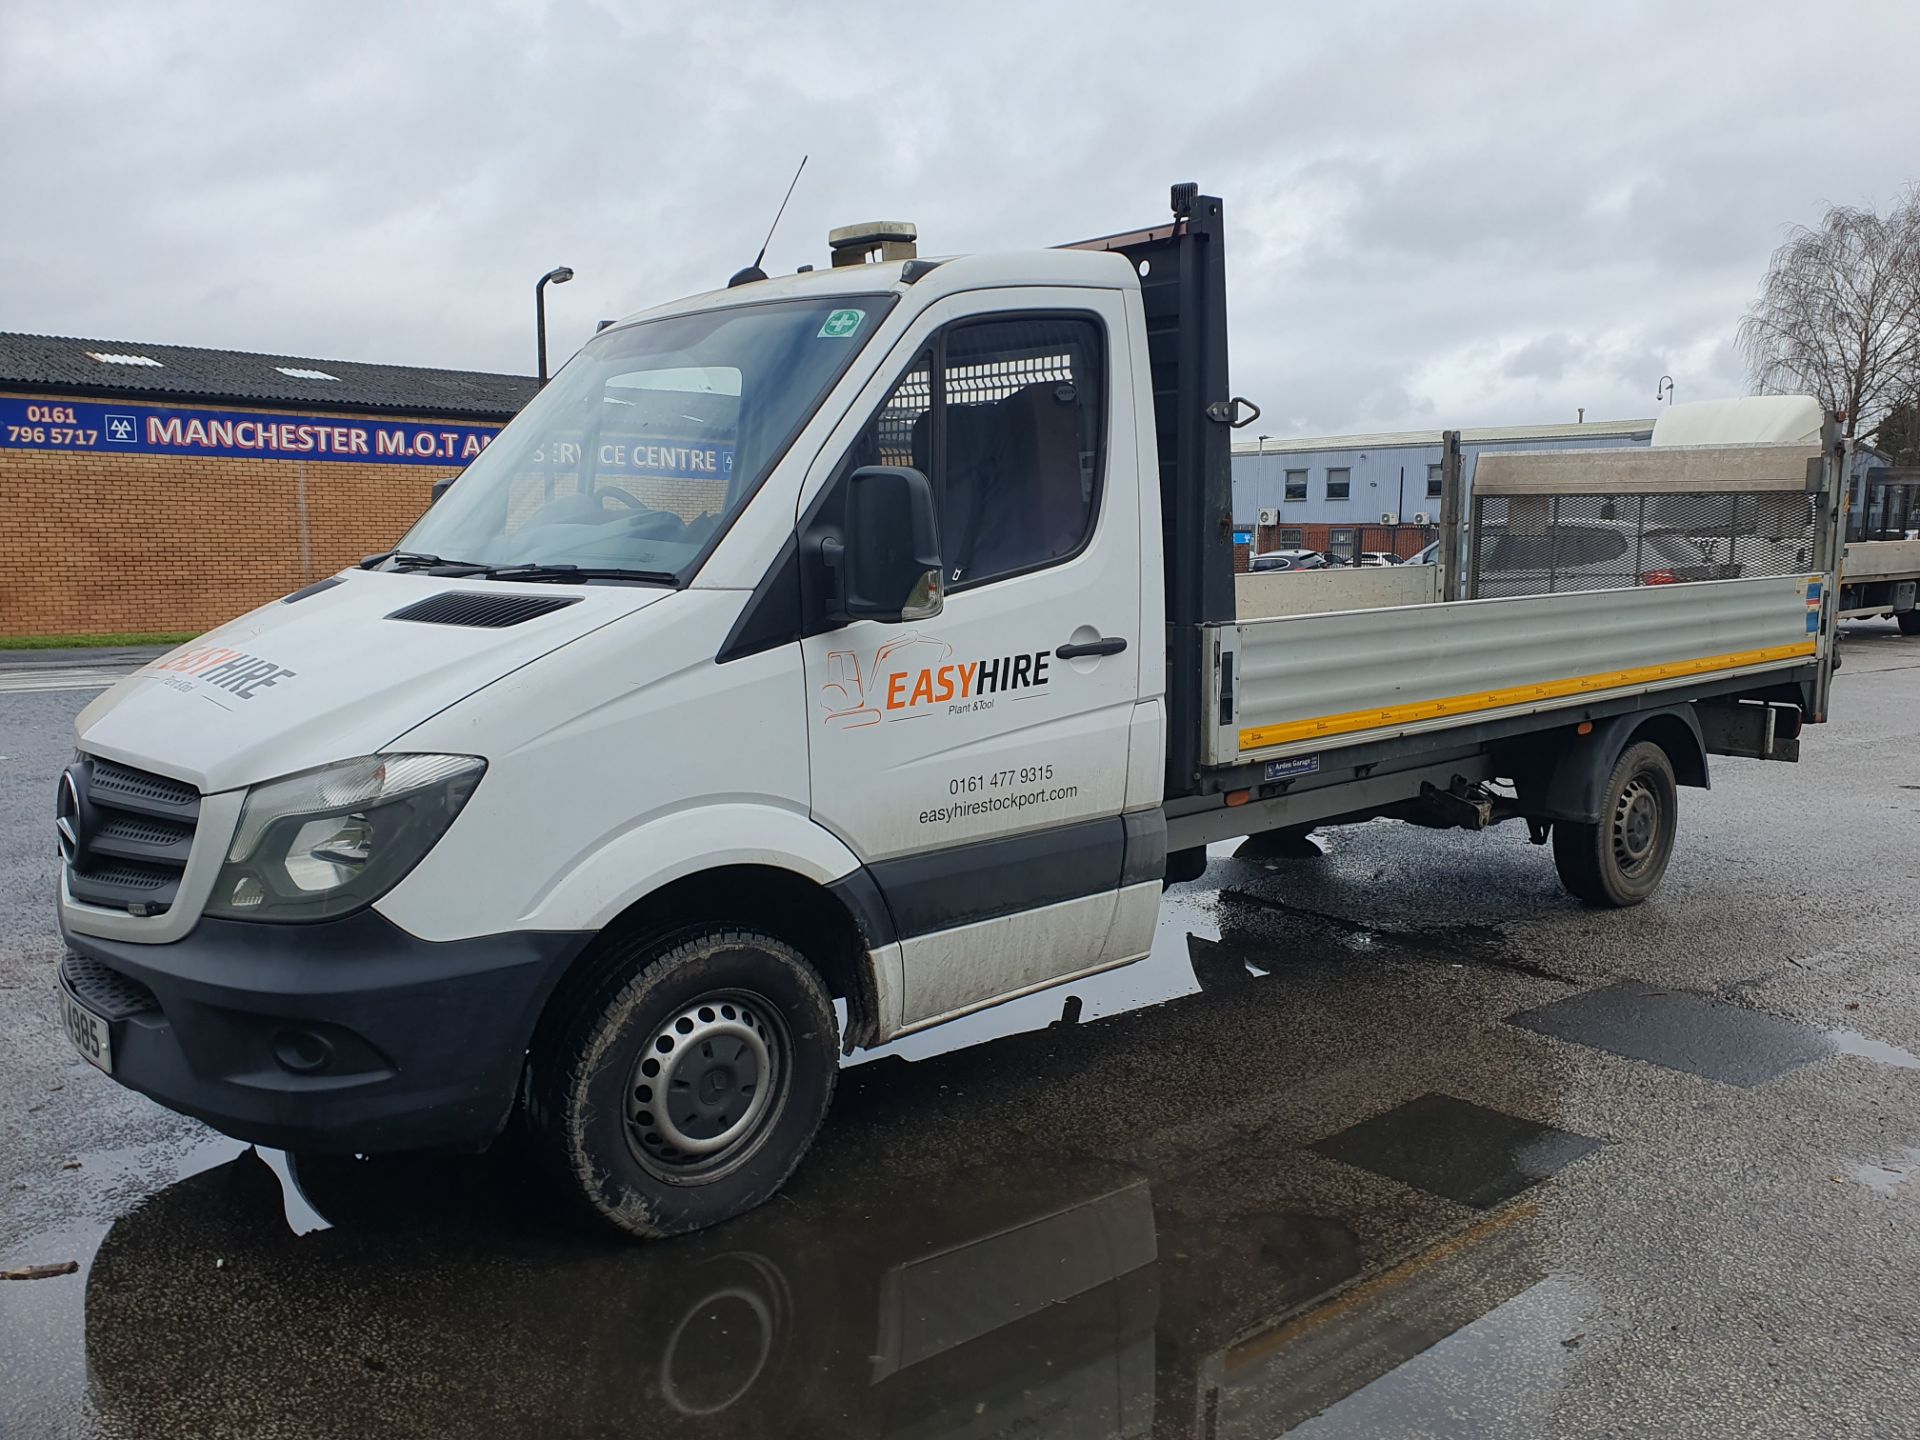 Mercedes-Benz Sprinter 314CDI Dropside Lorry w/ Tail-Lift | DIG 4985 | 102,887 Miles - Image 3 of 19